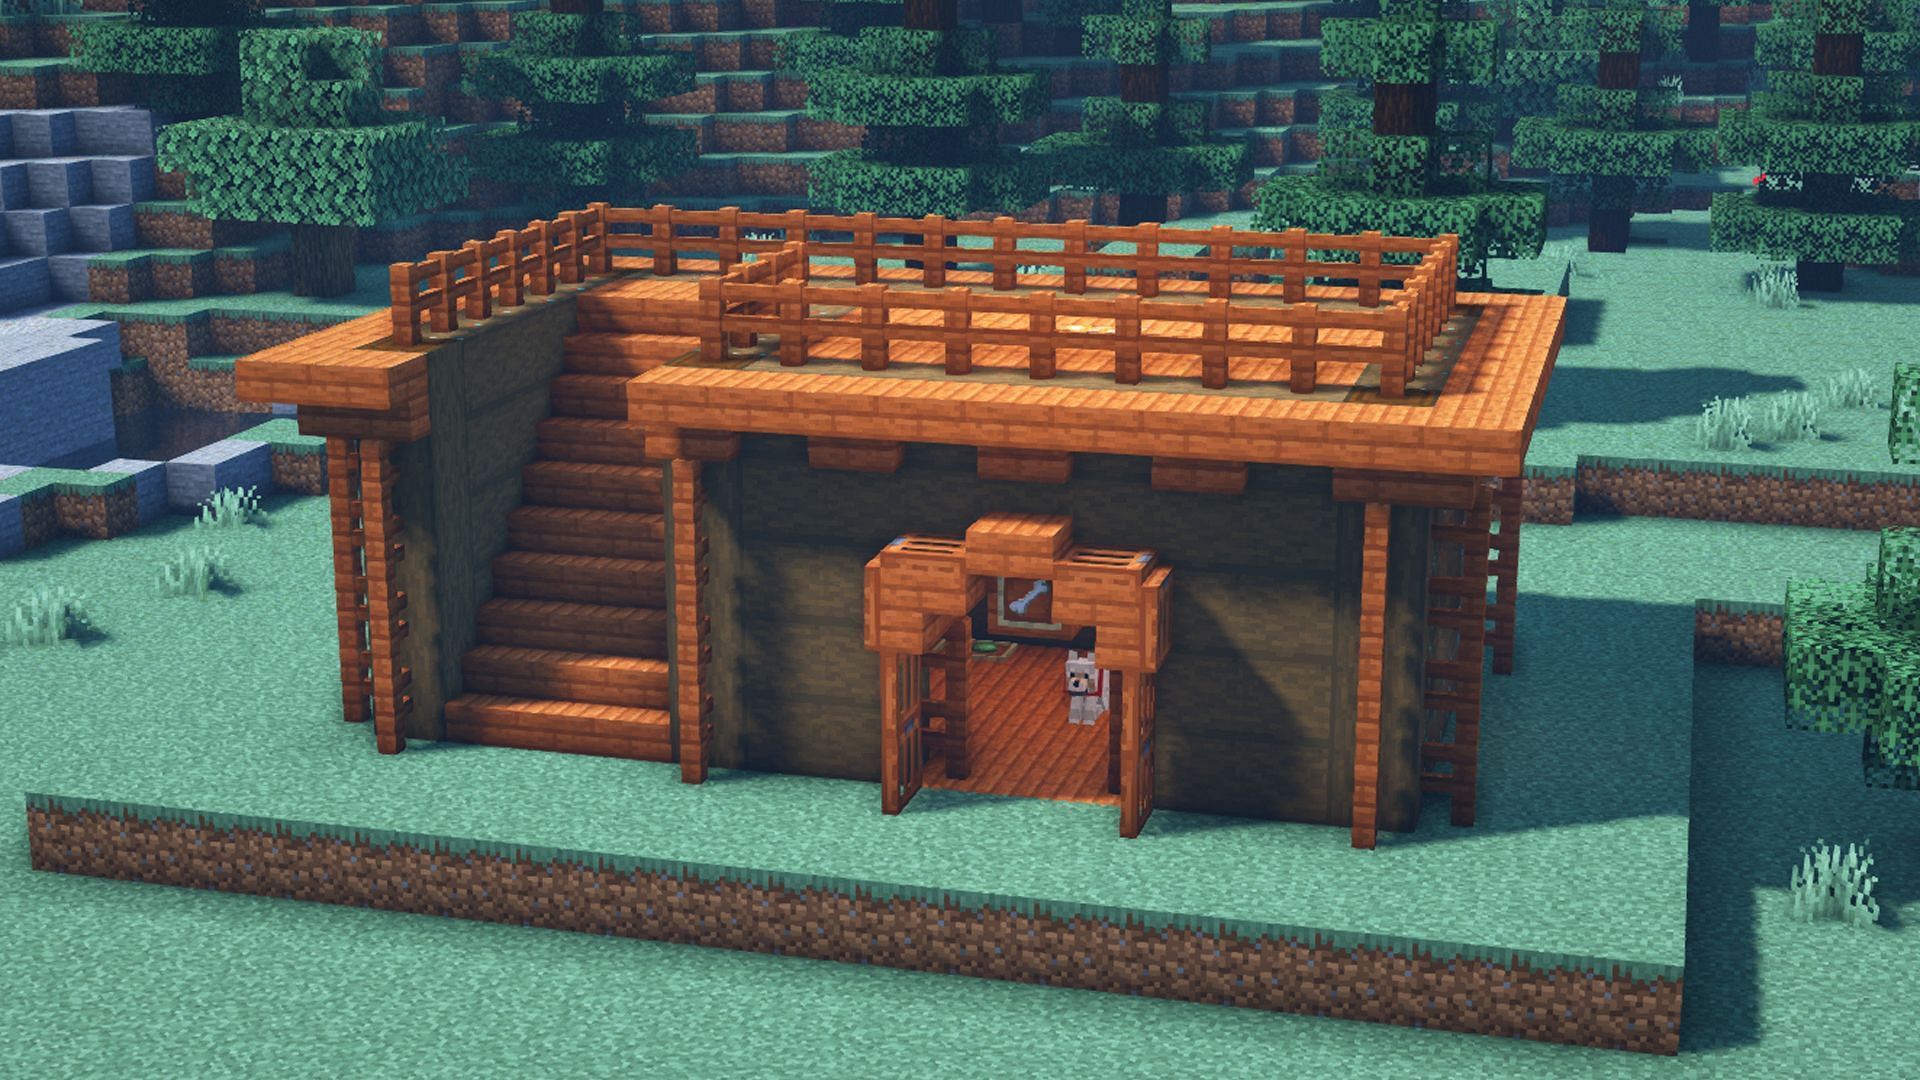 Minecraft fans can keep their tamed wolves cozy and secure in a well-built dog house (Image via u/Pierigin/Reddit)